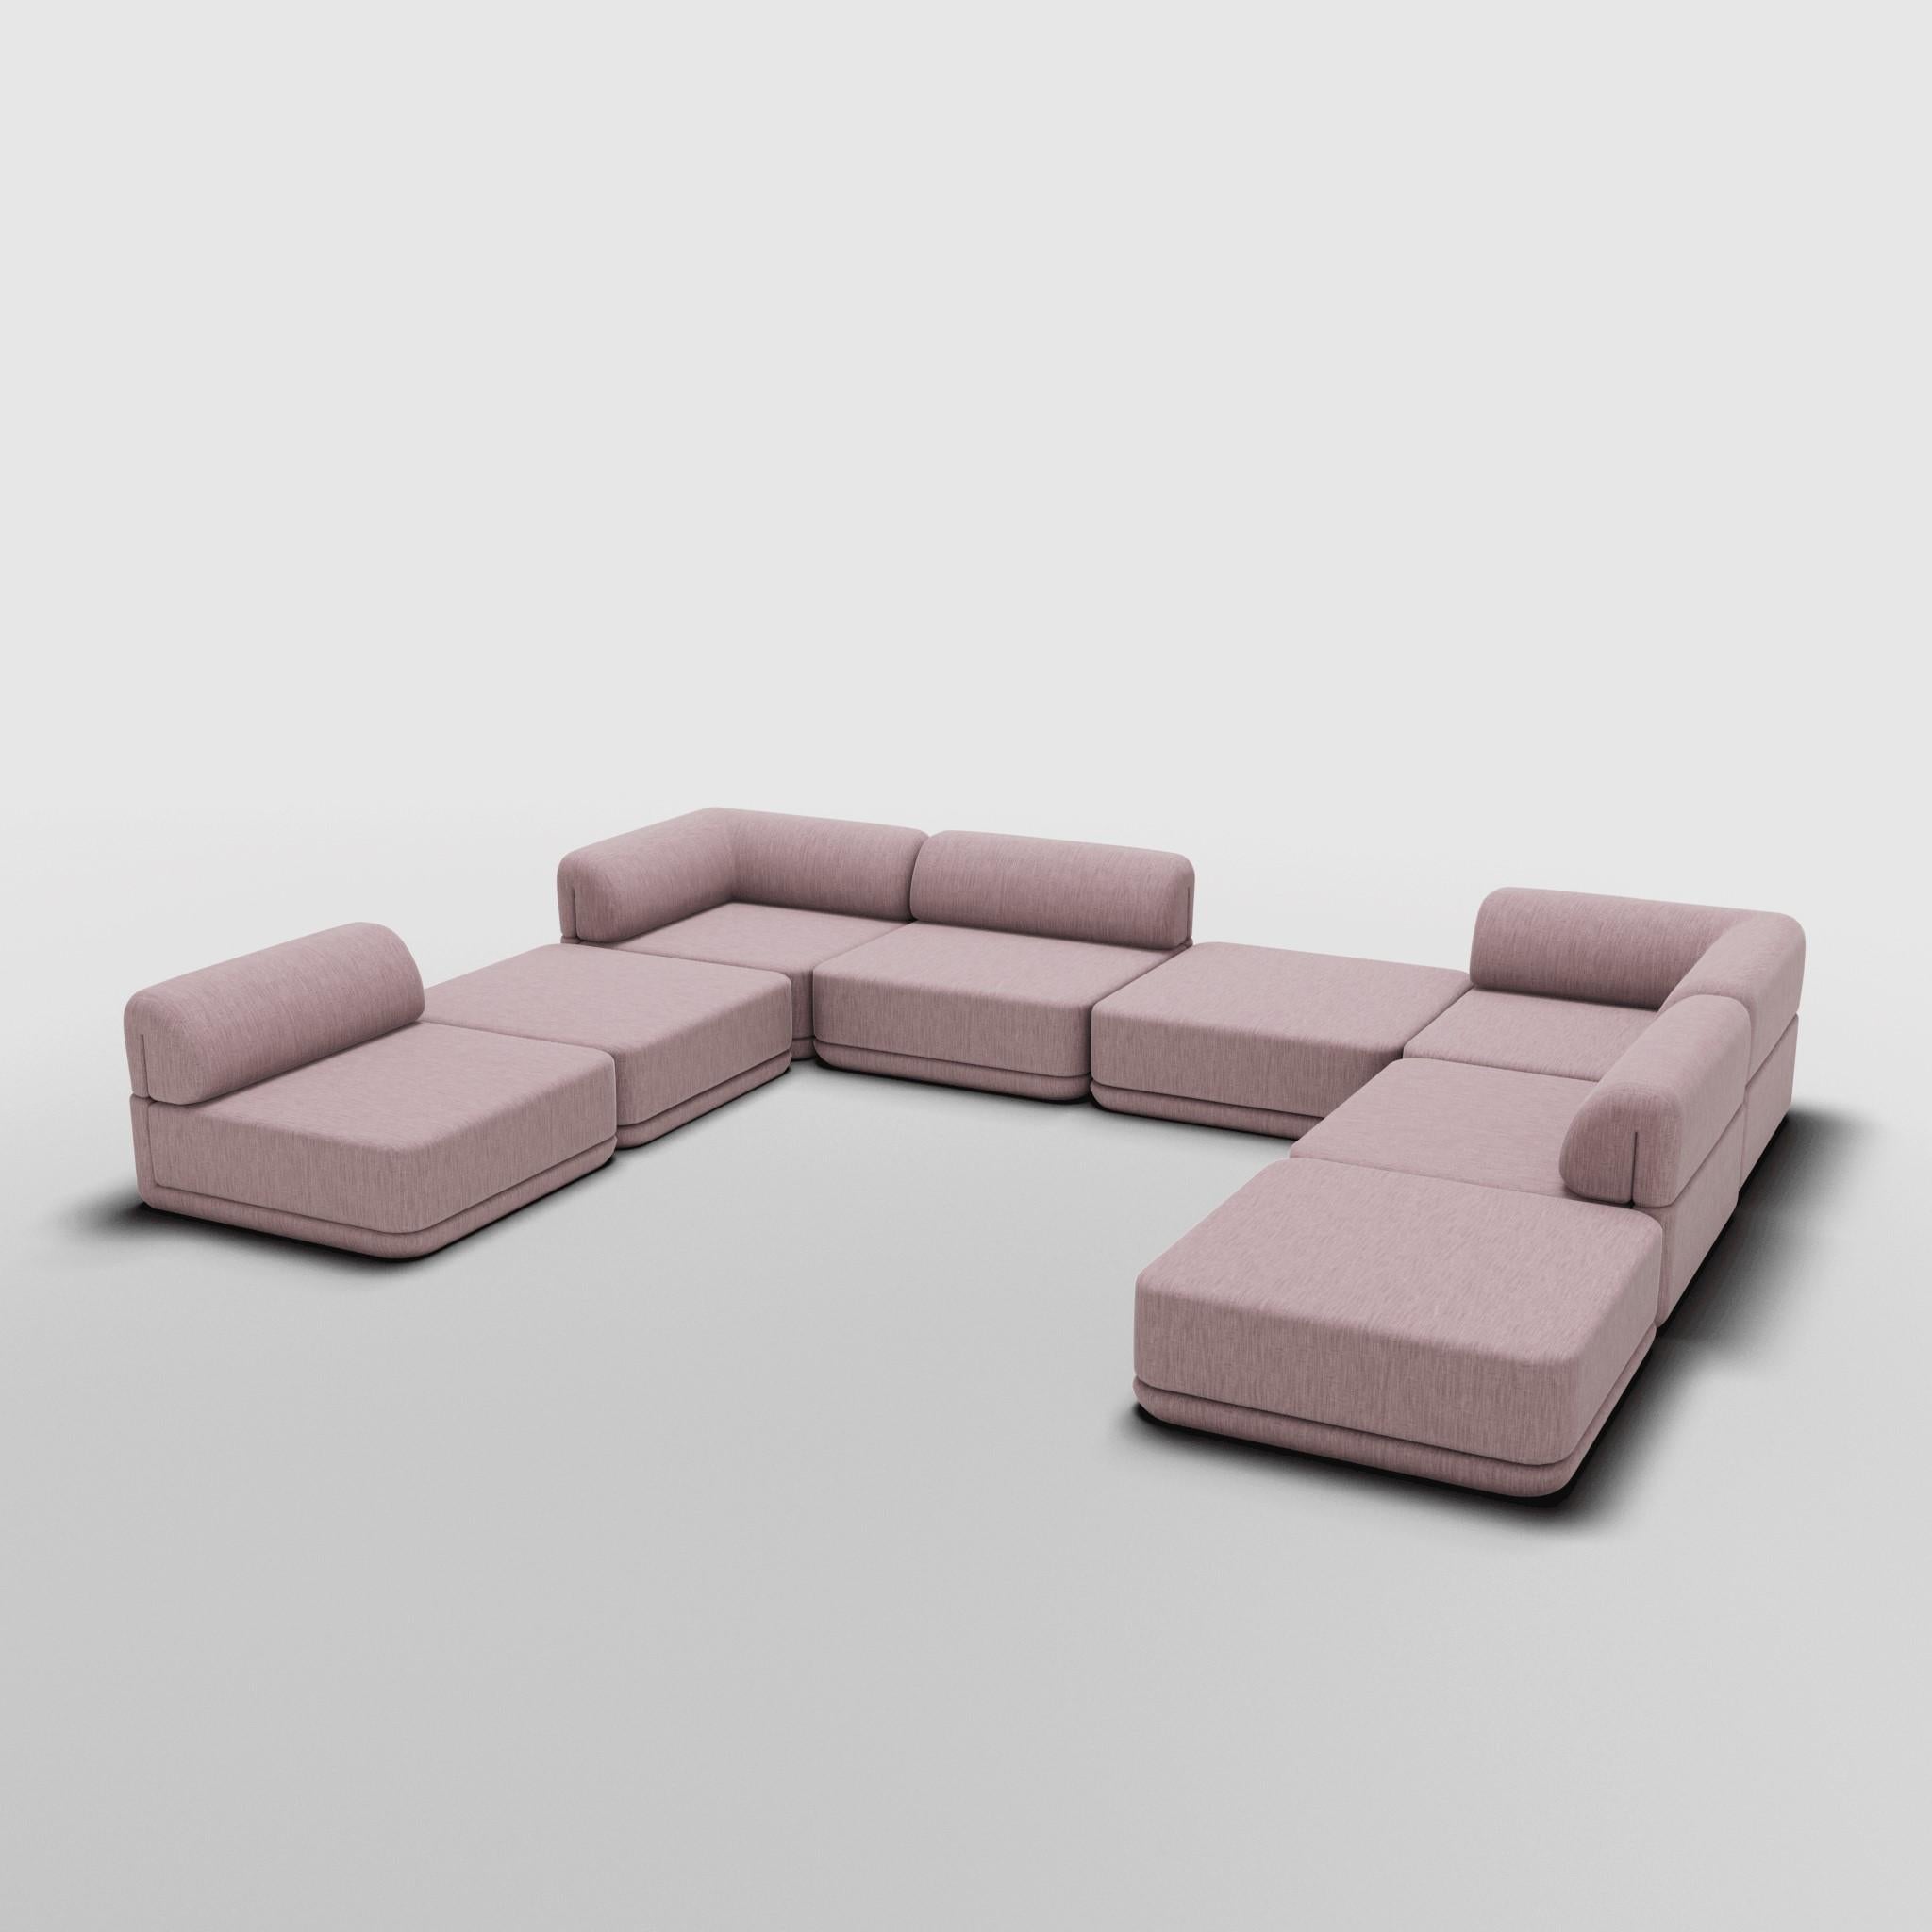 Contemporary The Cube Sofa - Corner Full Mix Sectional For Sale